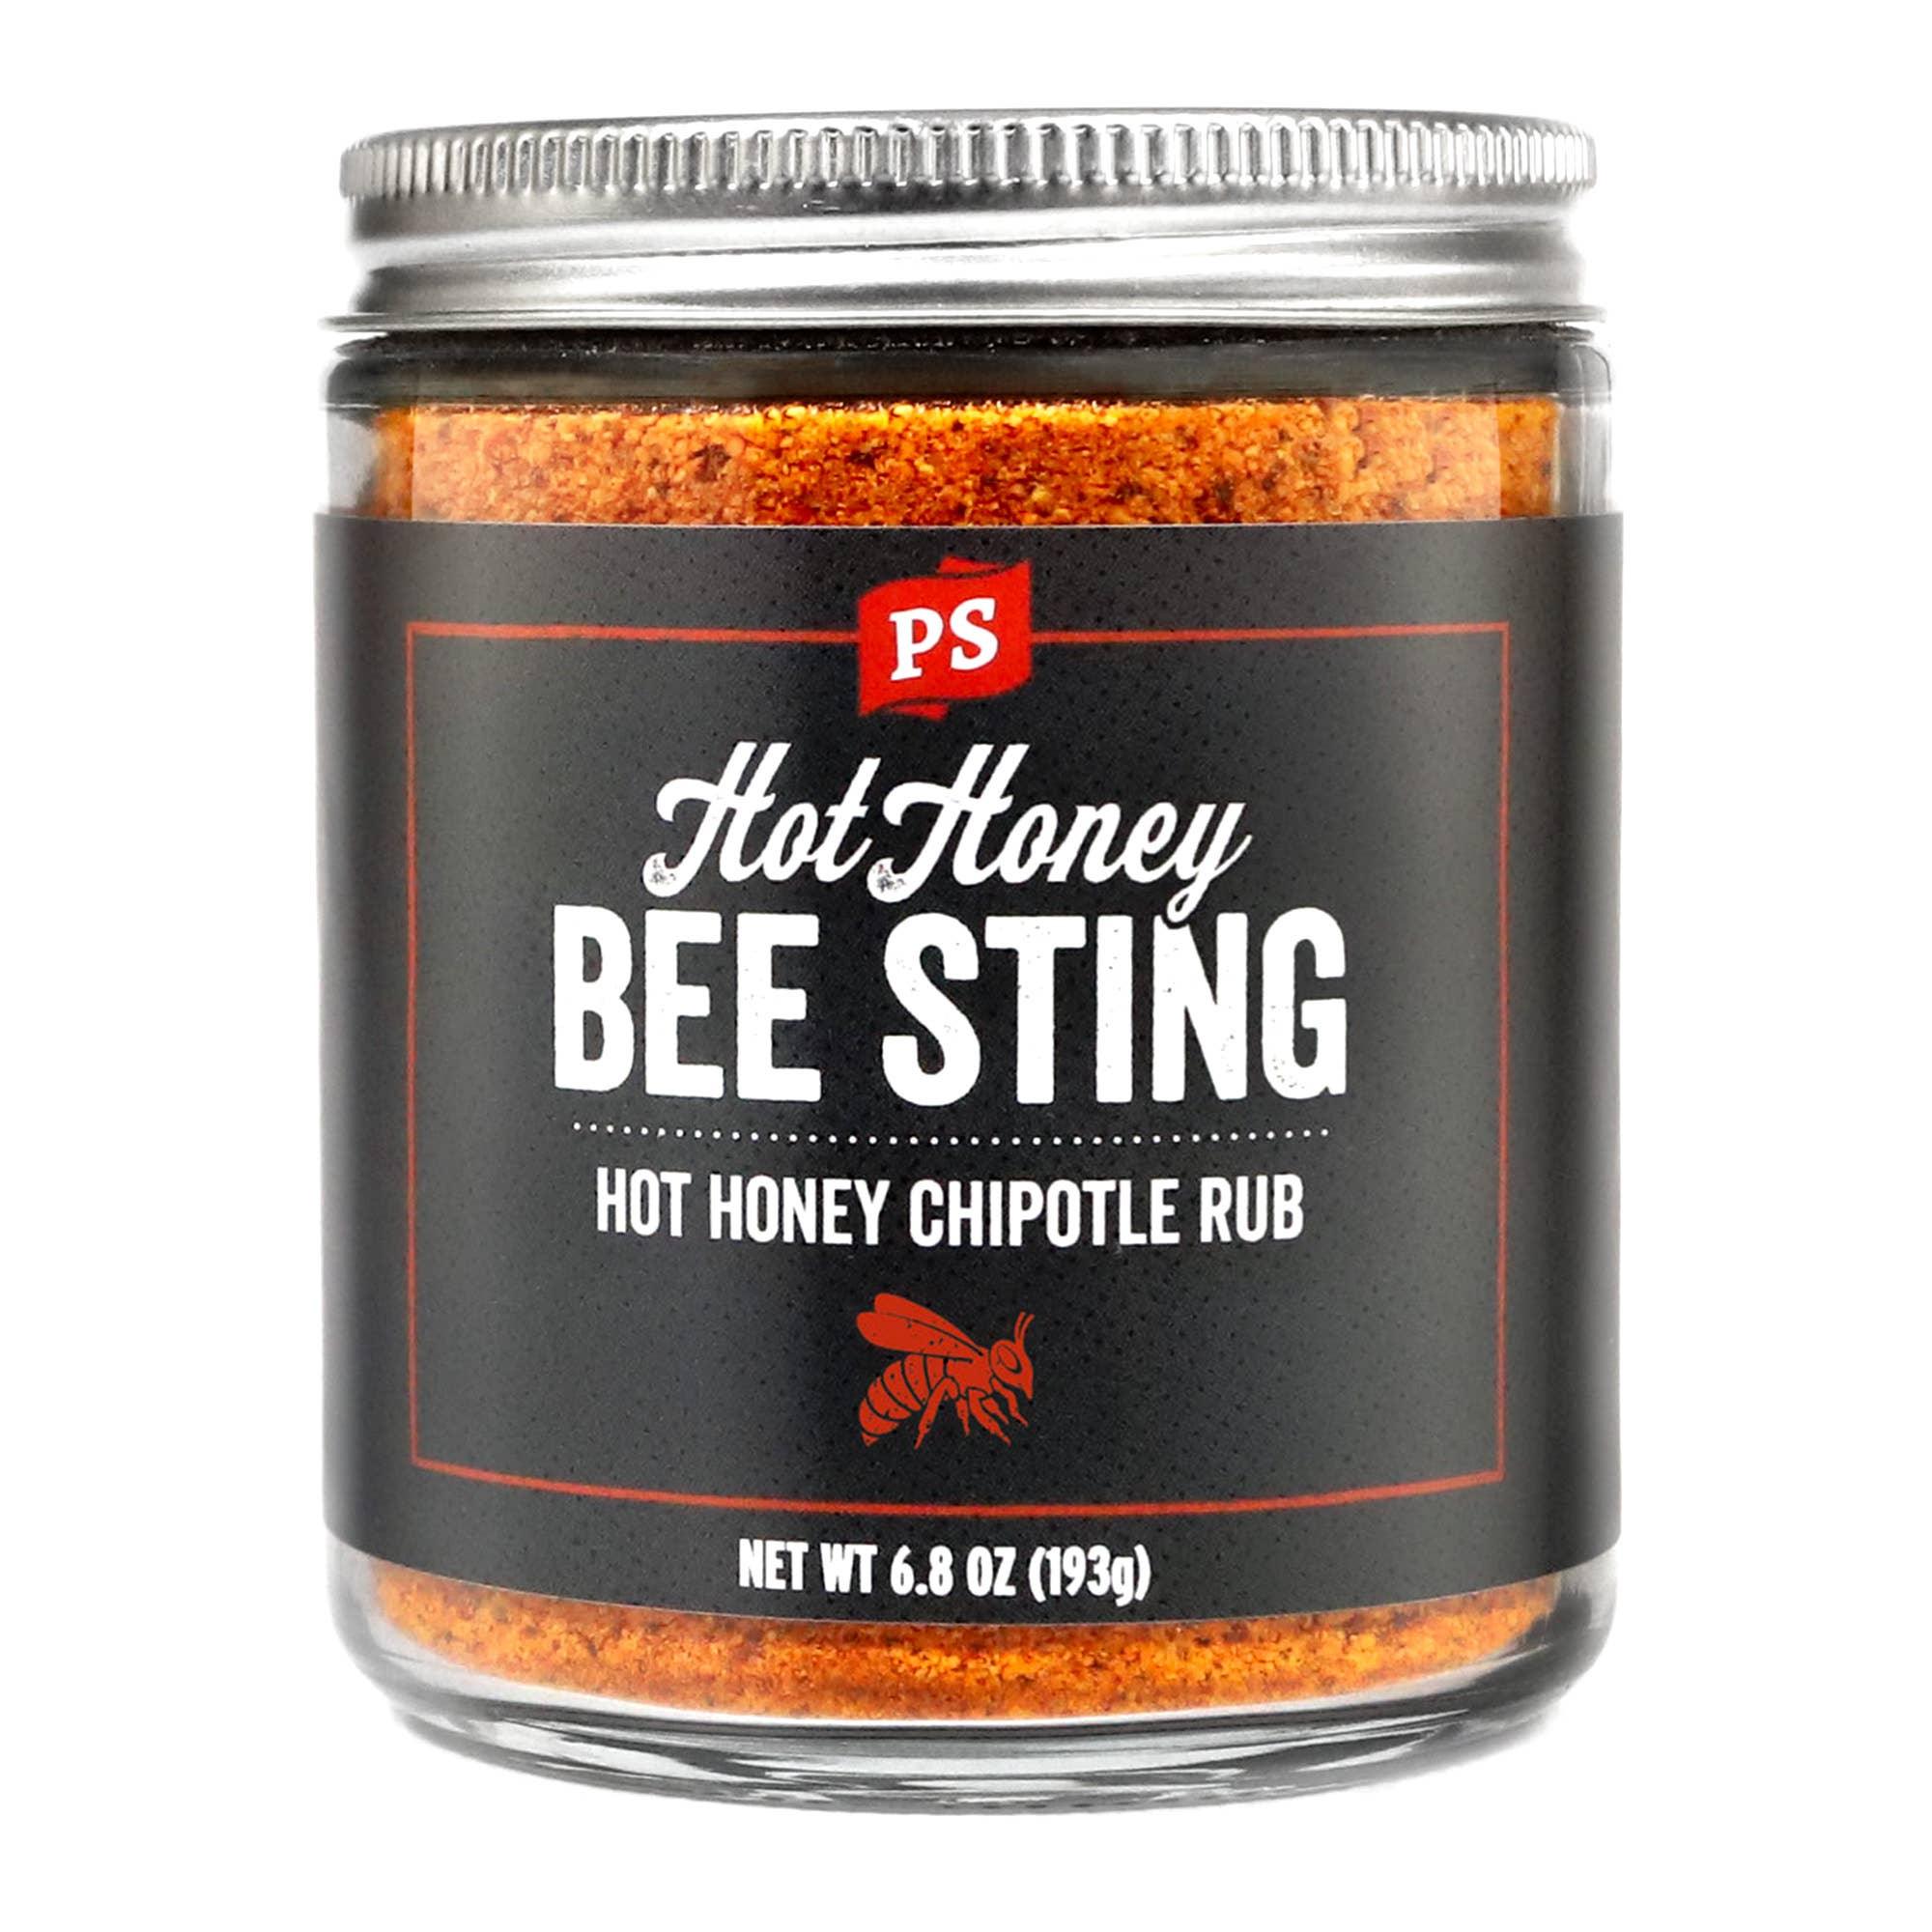 PS Seasoning BBQ Rubs - Bee Sting Hot Honey Chipotle - Leapfrog Outdoor Sports and Apparel